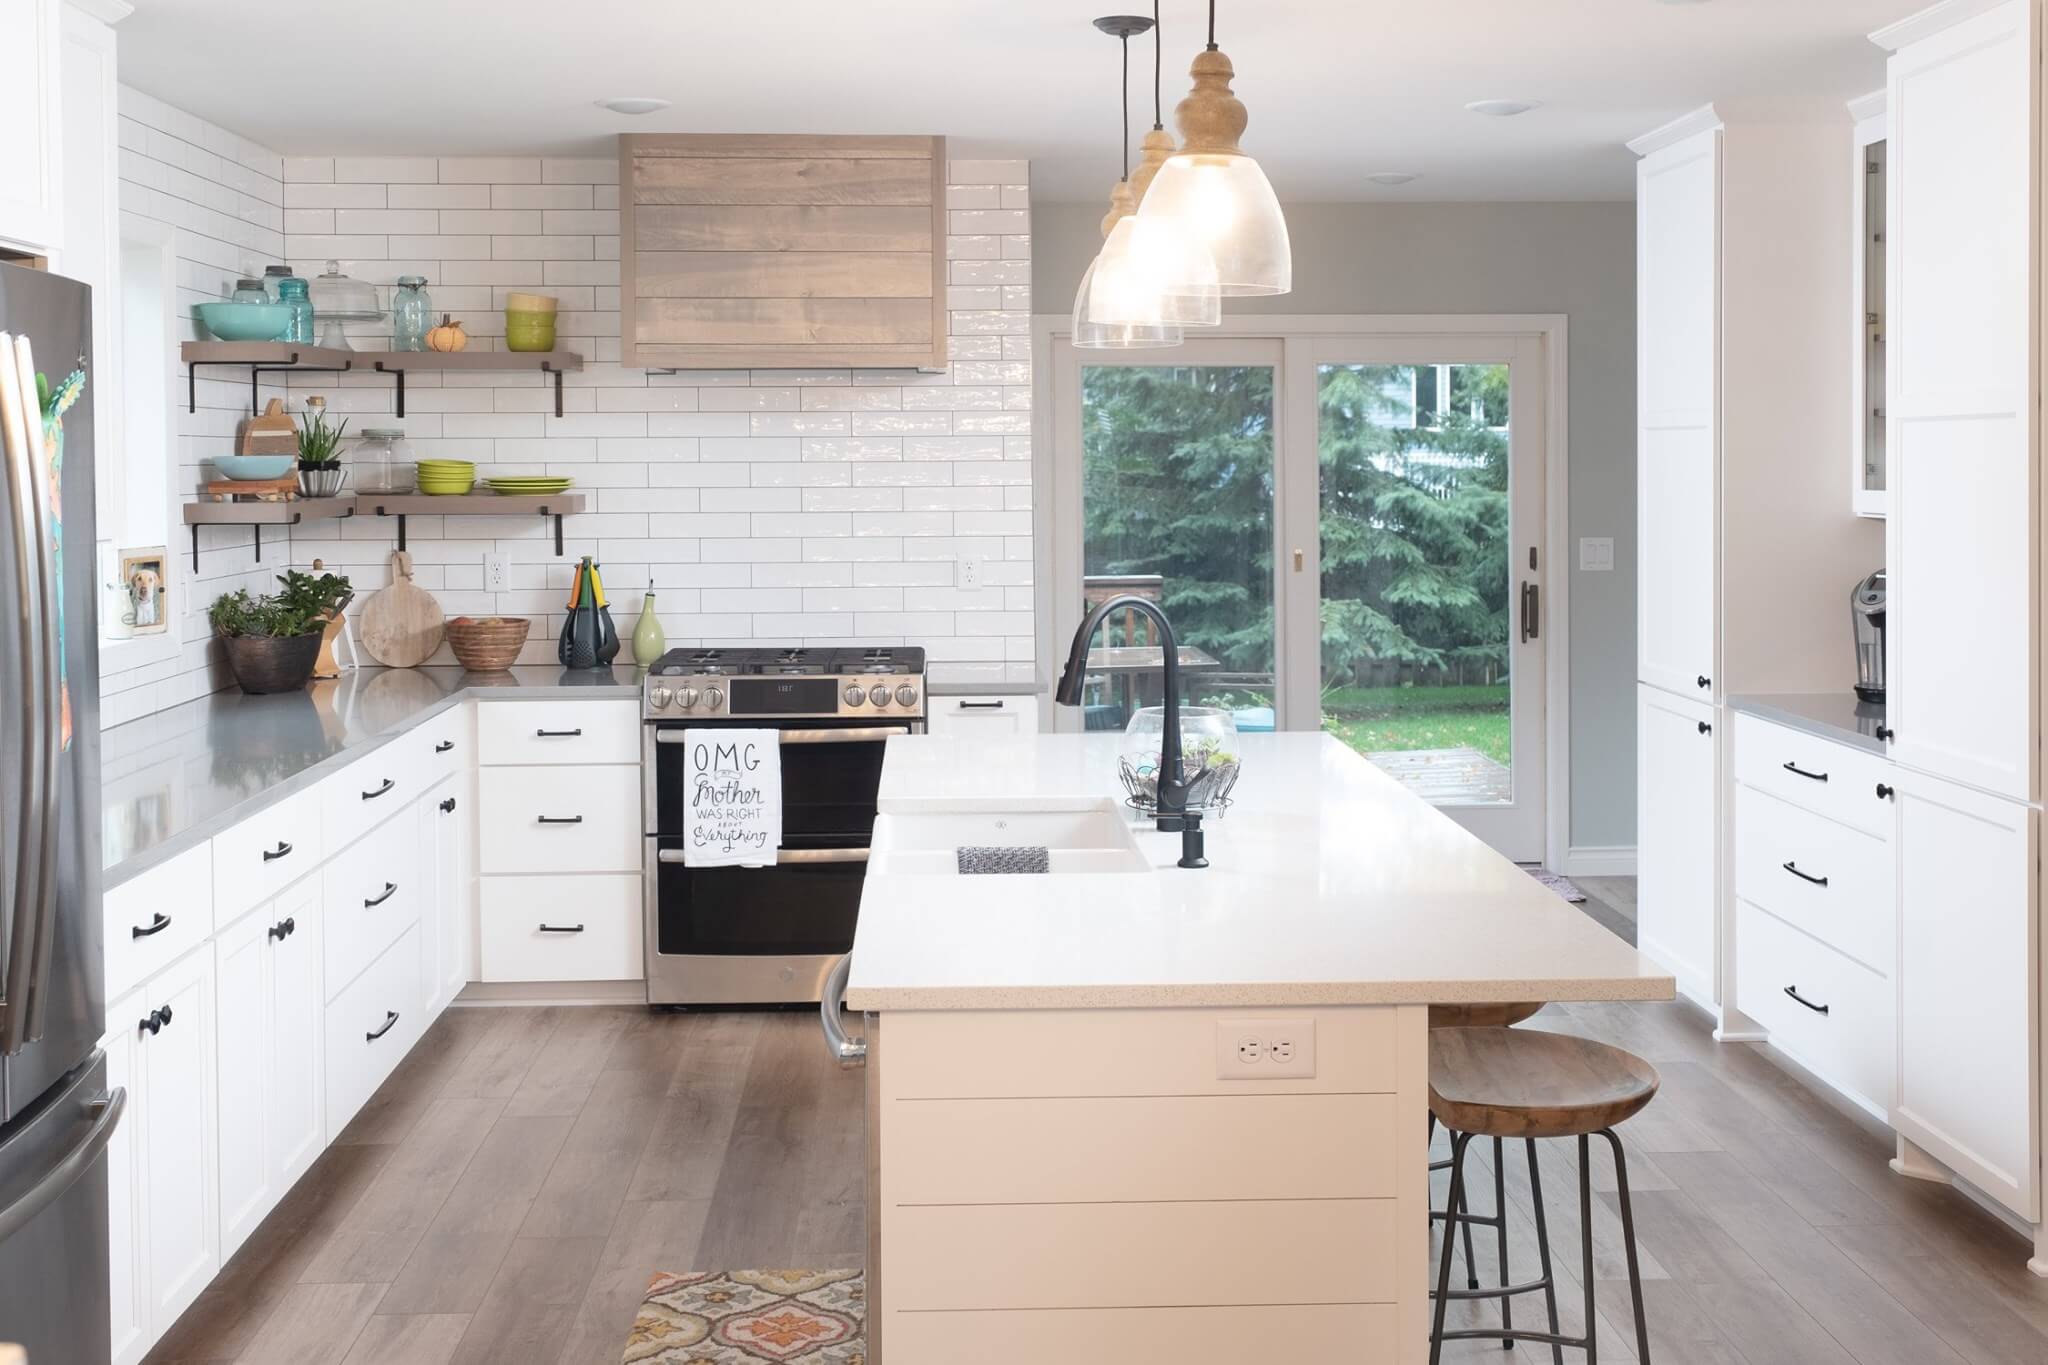 Remodeled kitchen by The Home Authority